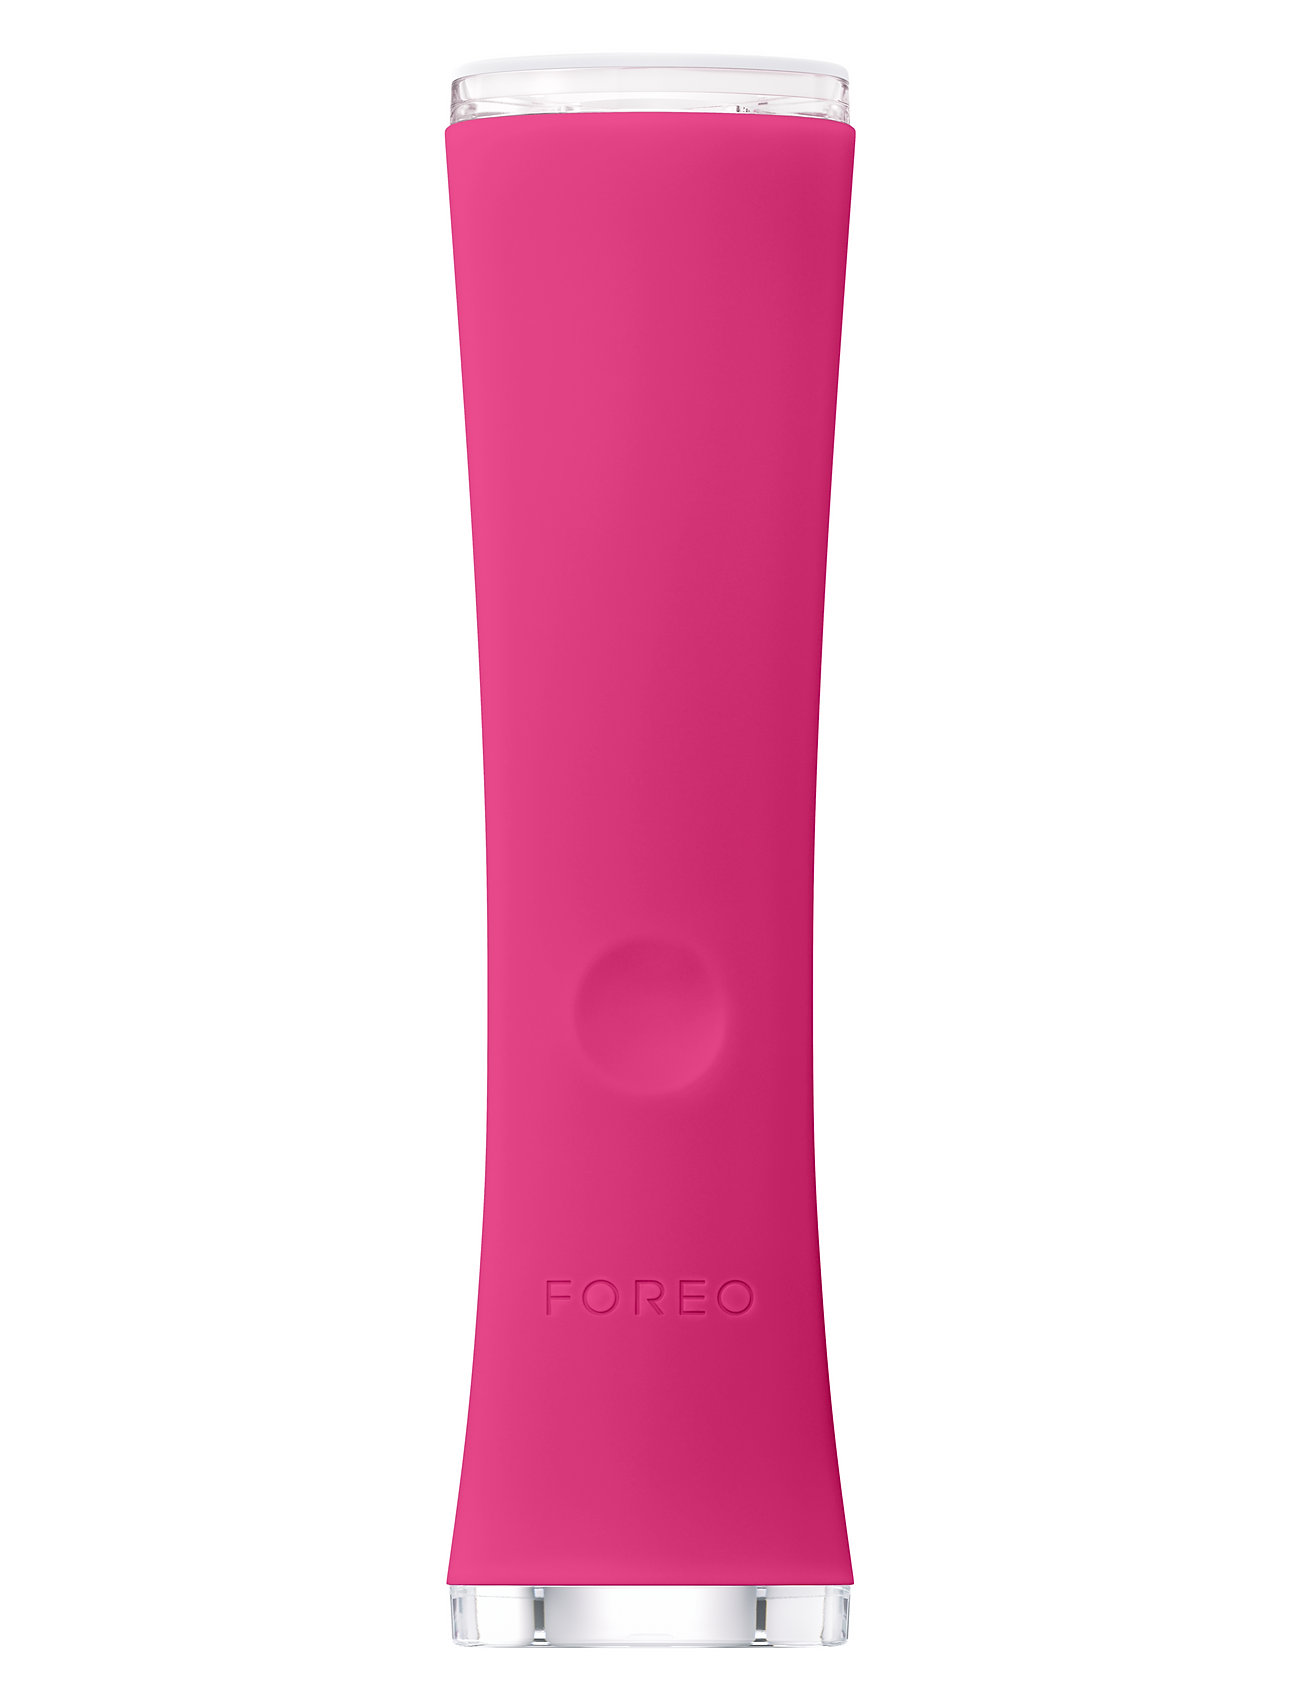 Espada™ 2 Fuchsia Beauty Women Skin Care Face Cleansers Accessories Pink Foreo